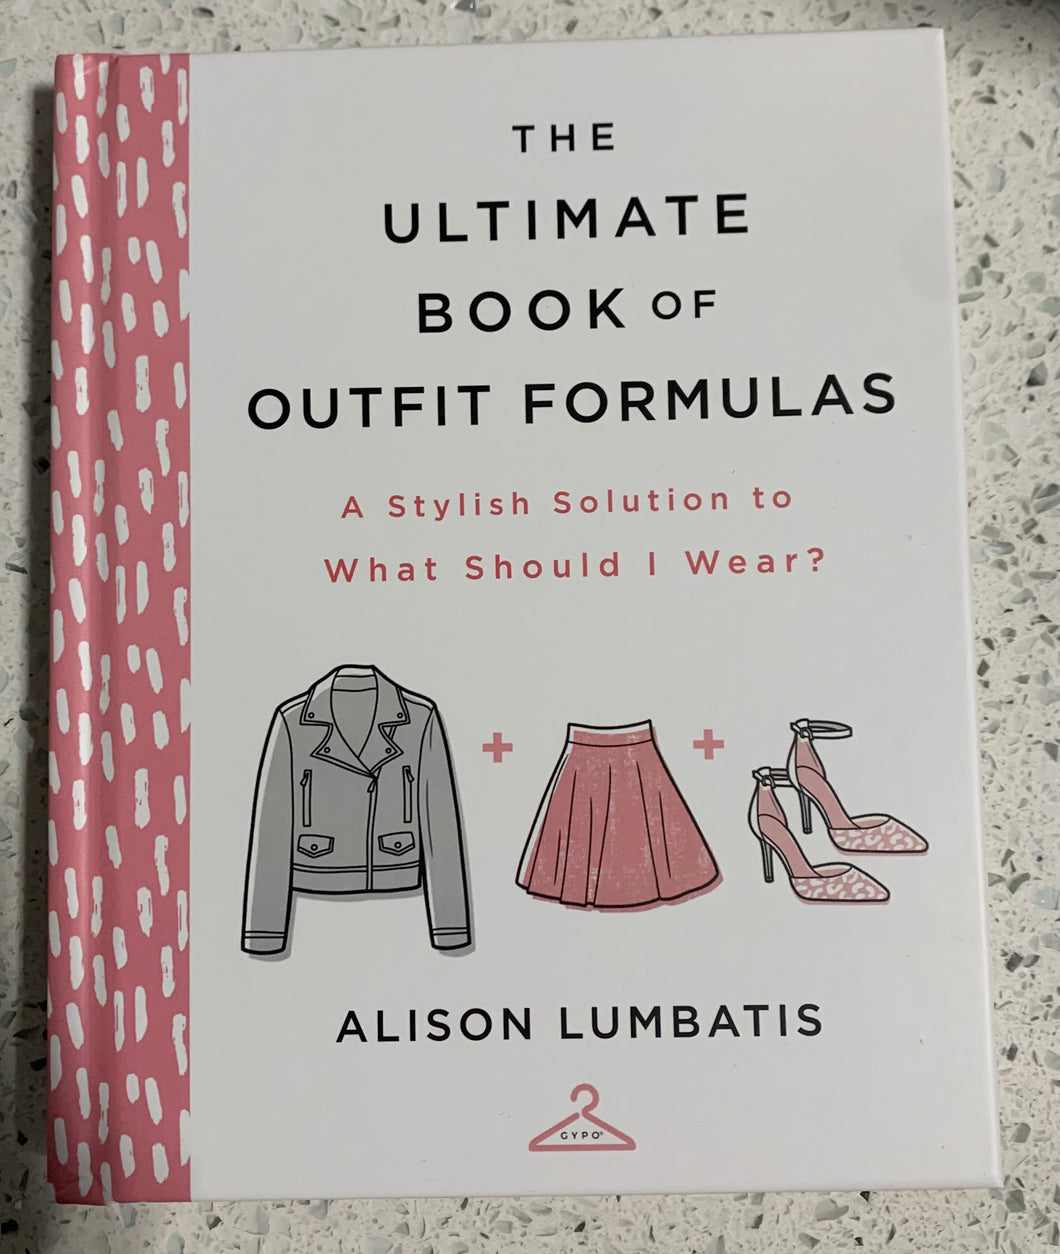 The Ultimate Book of Outfit Formulas